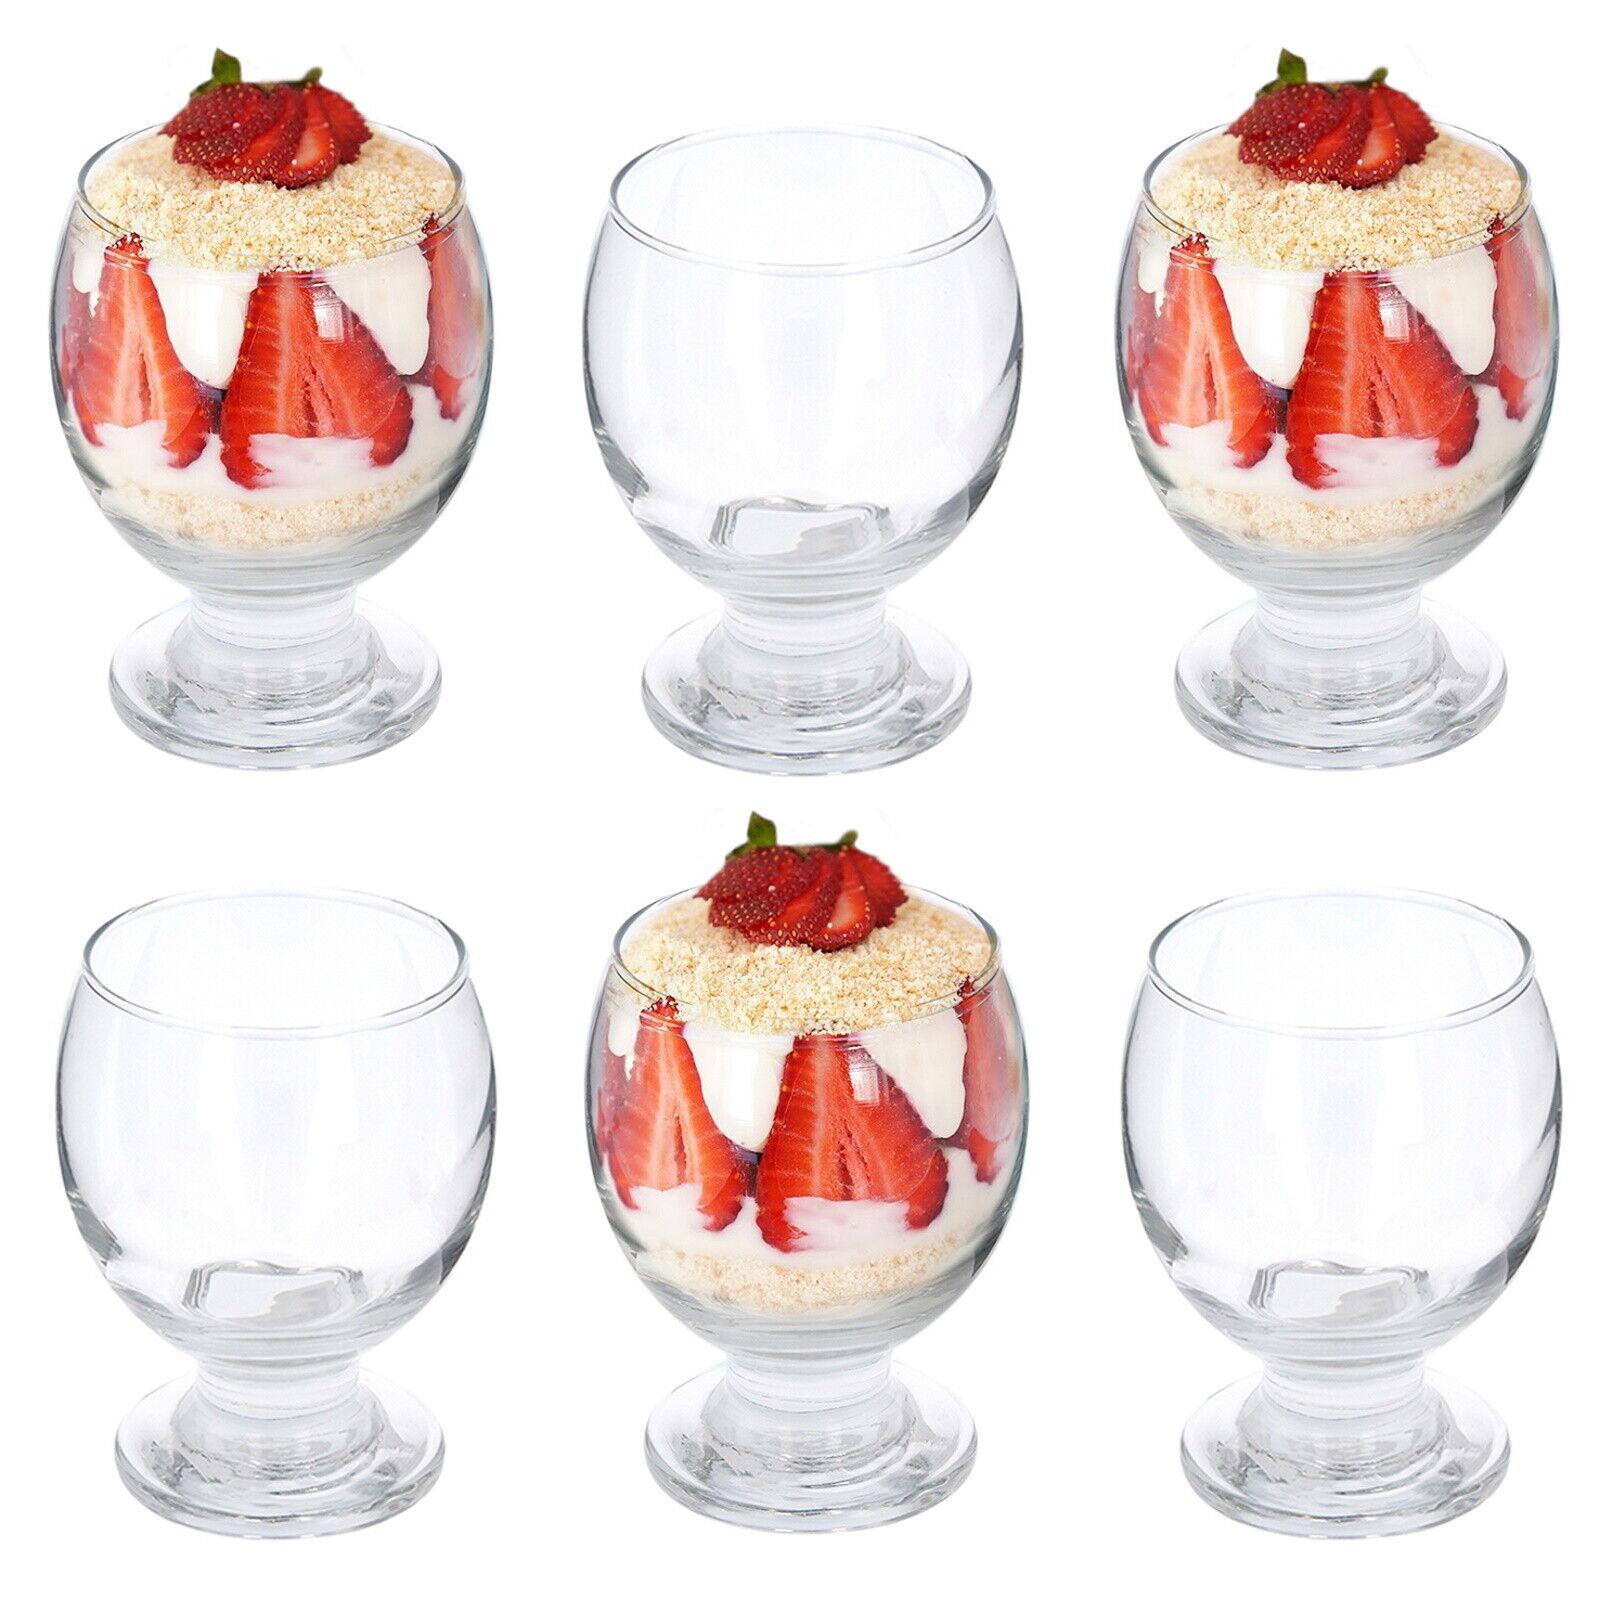 Set of 6 Glass Bowls Set Unique Embossed Crystal Look Footed Dishes Fruit Trifle Salad Trifle Dessert Sundae Ice Cream Appetiser Starter Prawn Cocktail Pudding Bowls 